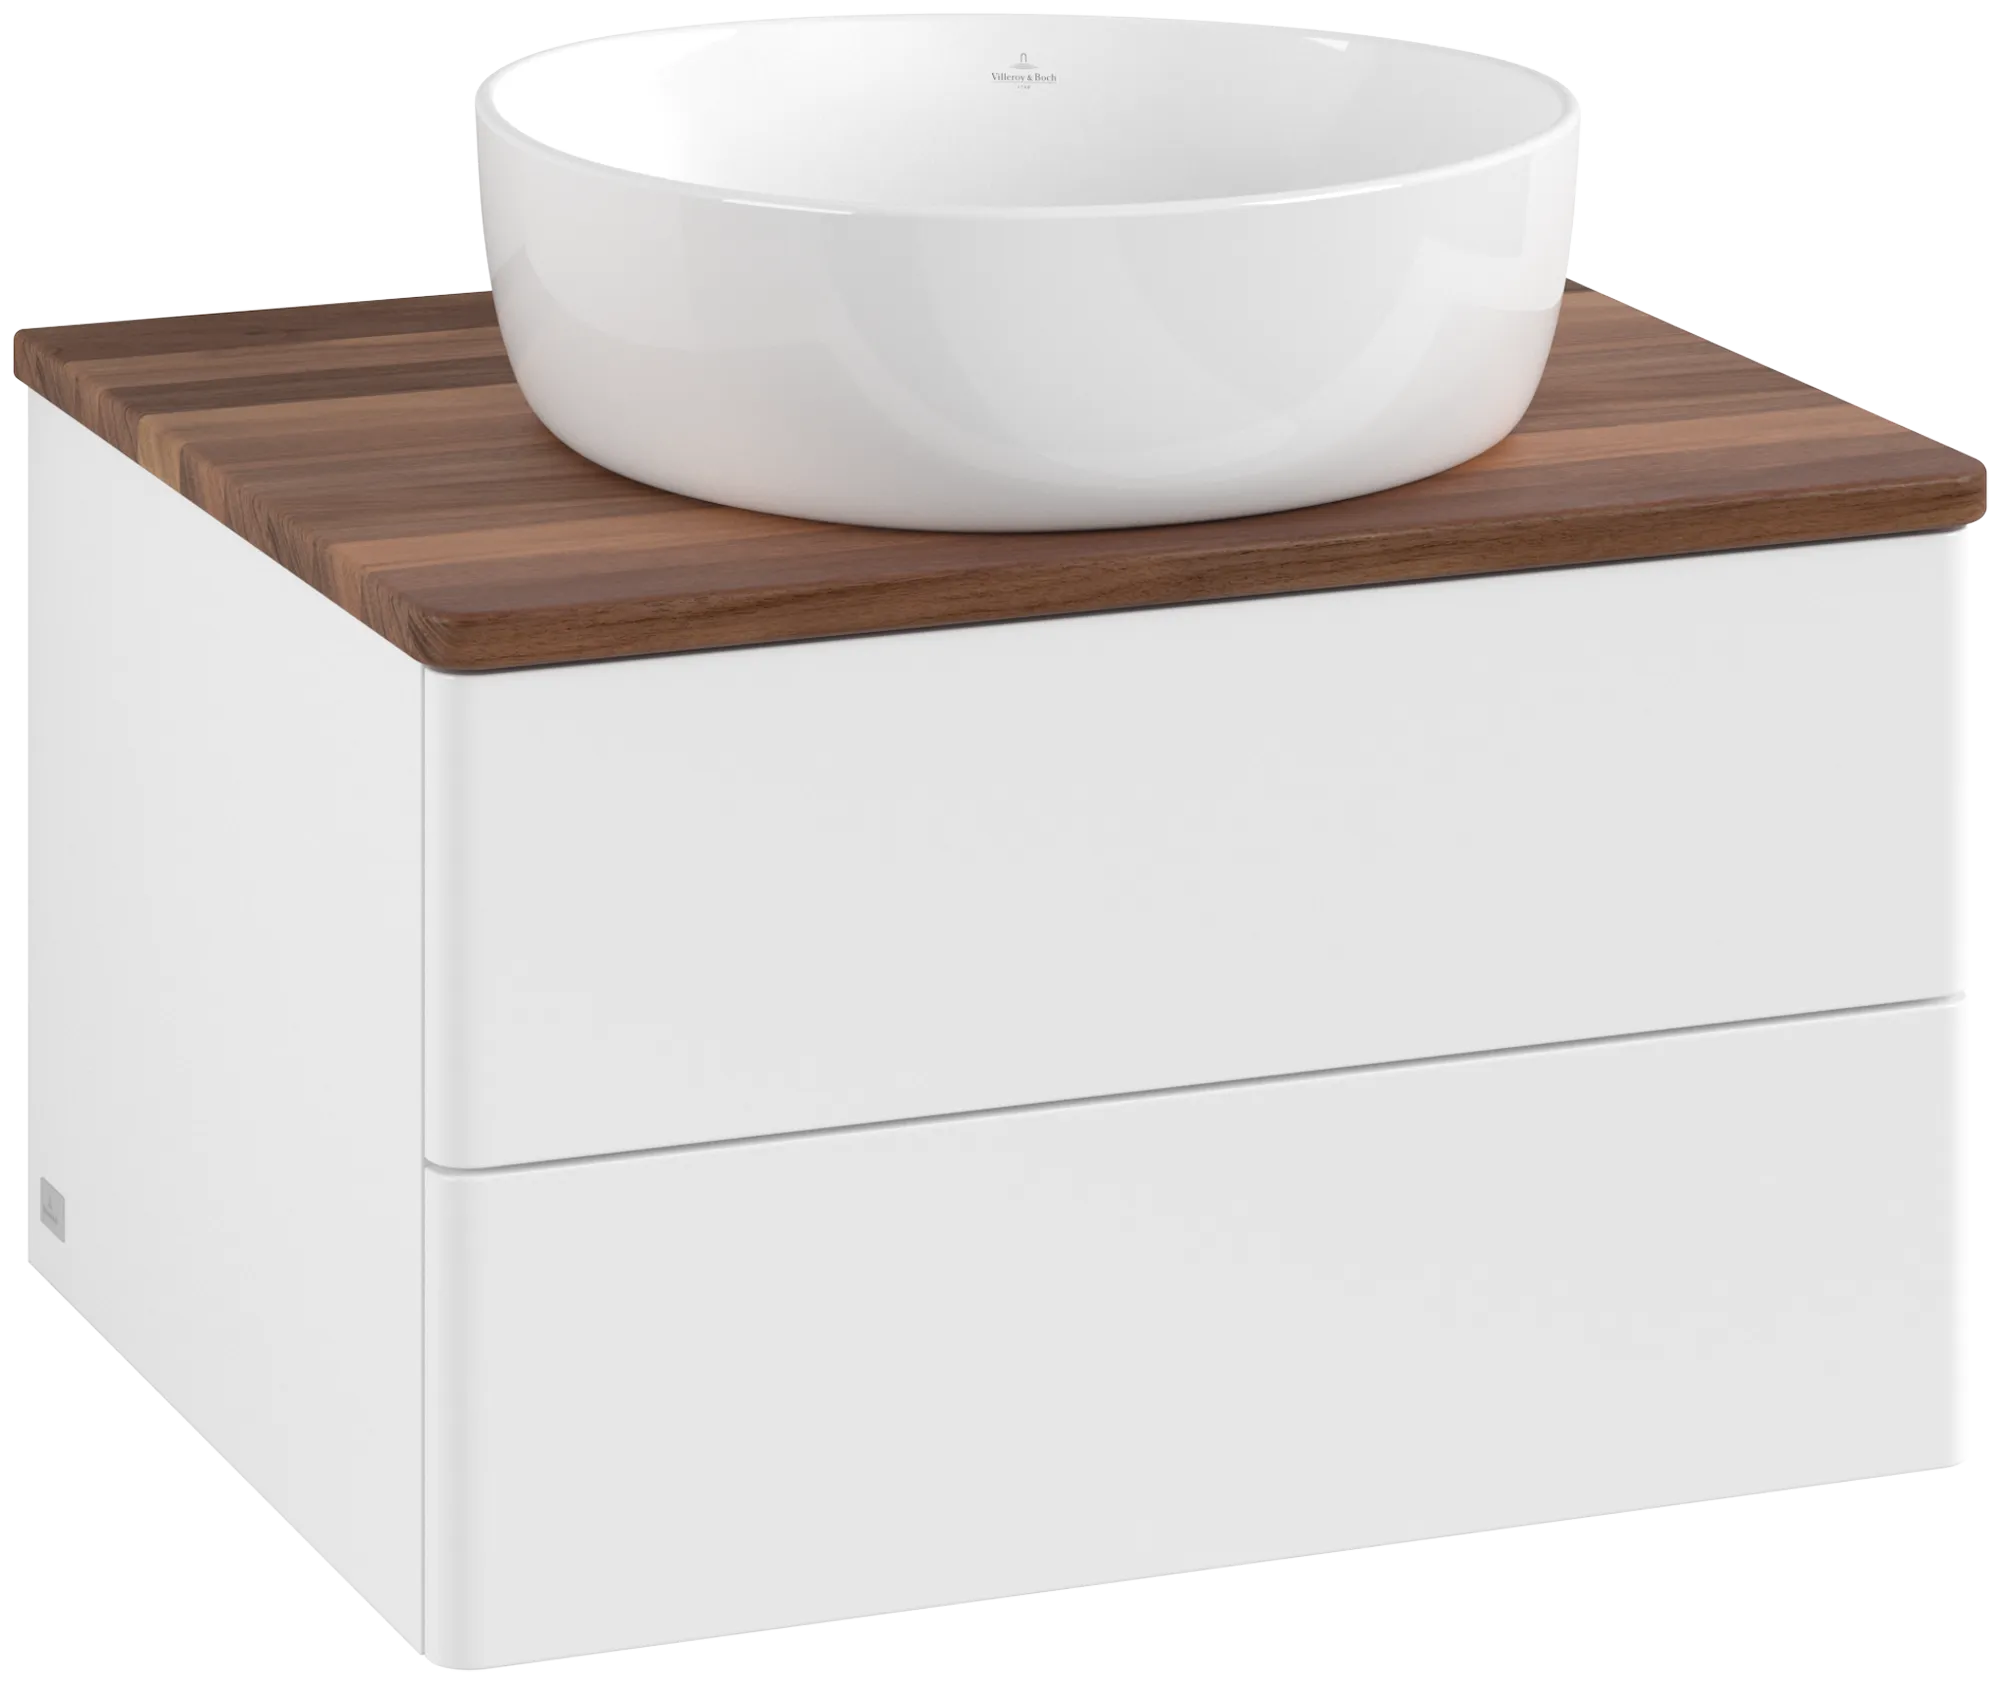 VILLEROY BOCH Antao Vanity unit, with lighting, 2 pull-out compartments, 600 x 360 x 500 mm, Front without structure, White Matt Lacquer / Warm Walnut #L18012MT resmi